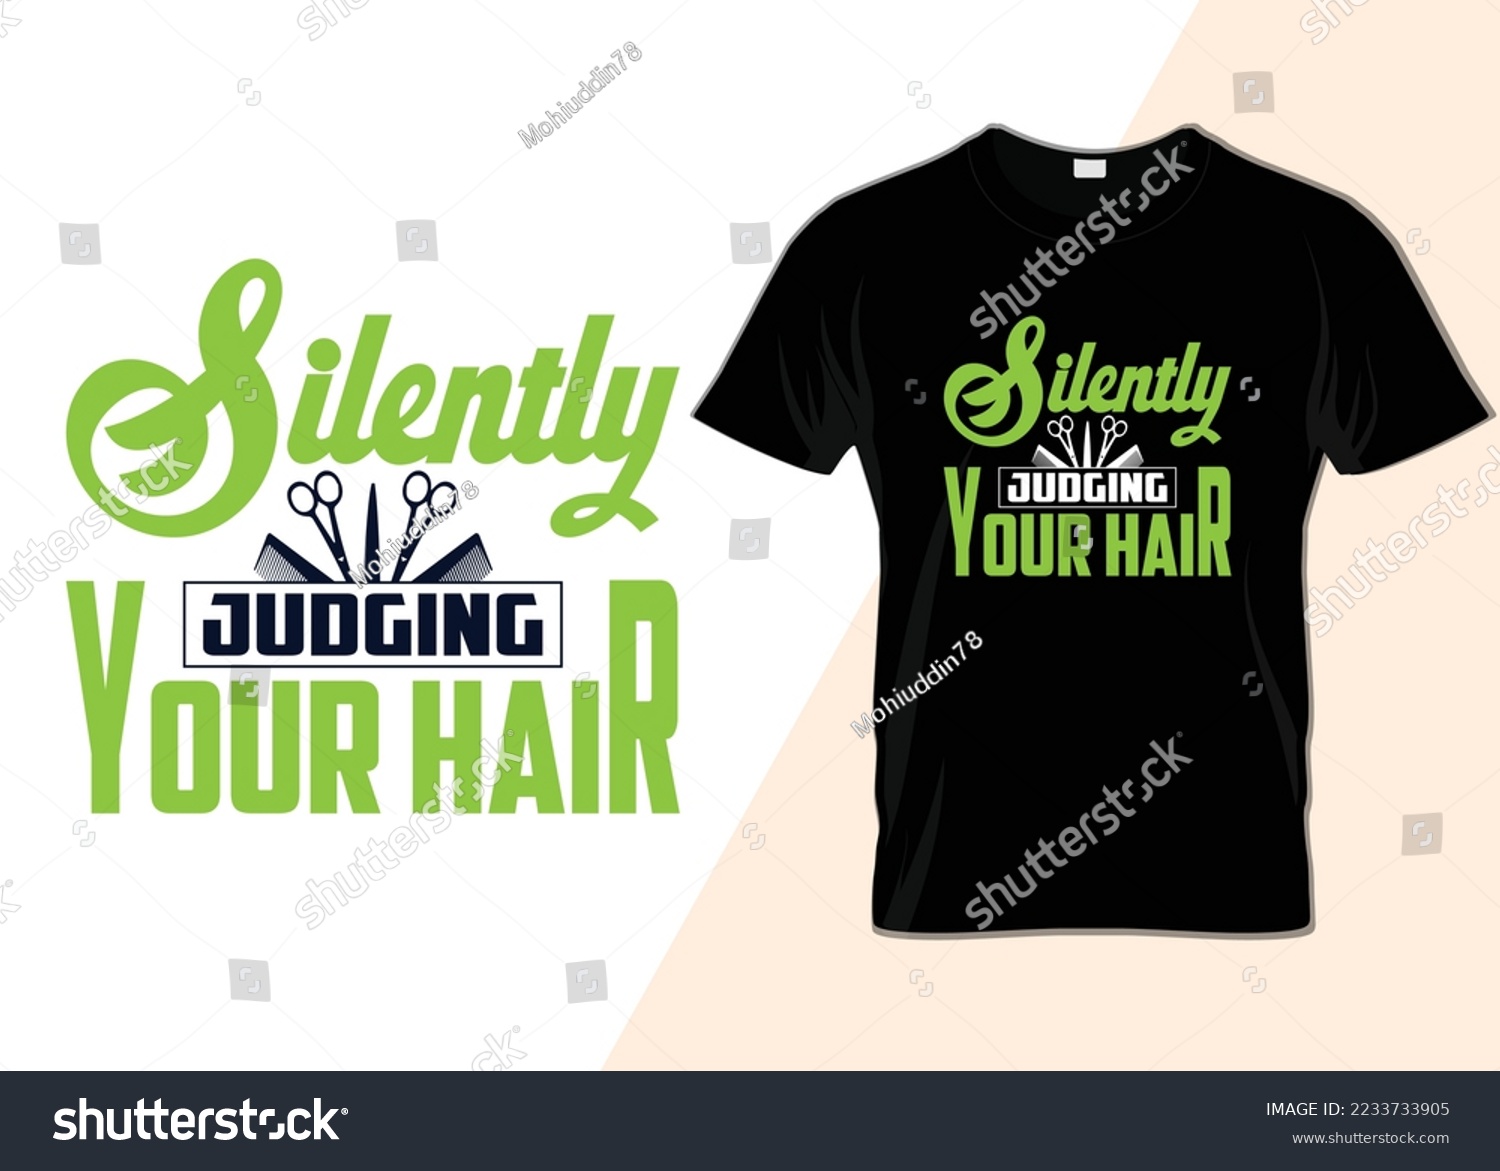 SVG of Silently judging your hair T-shirt design svg